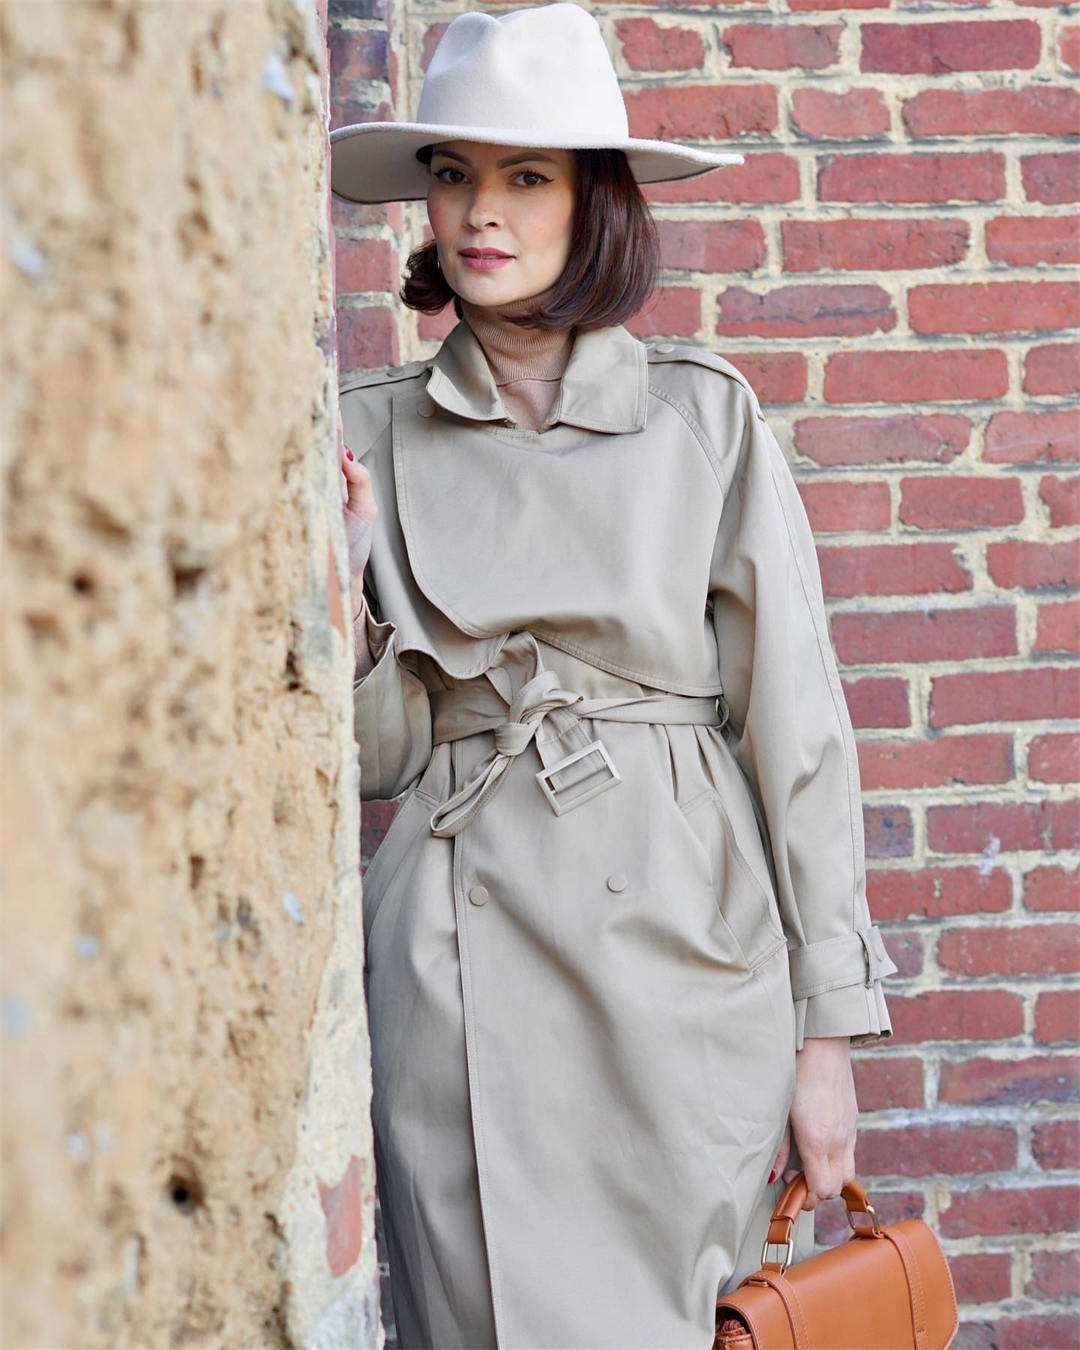 Trench Coat outfit ideas for women 84